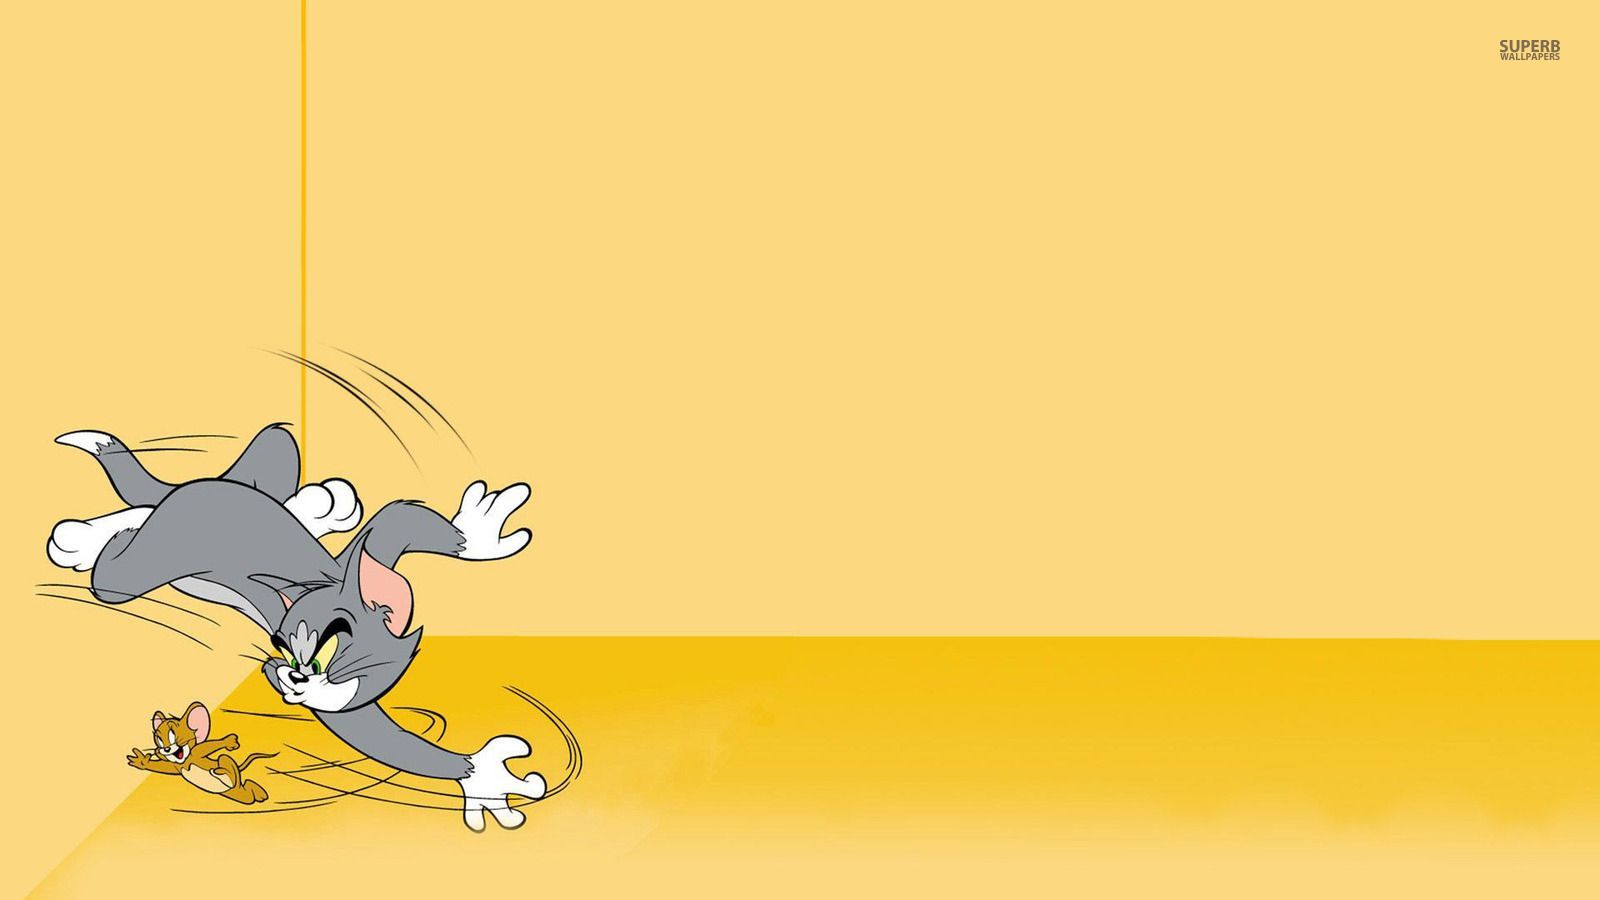 Tom and Jerry - Tom and Jerry Wallpaper (38677680) - Fanpop